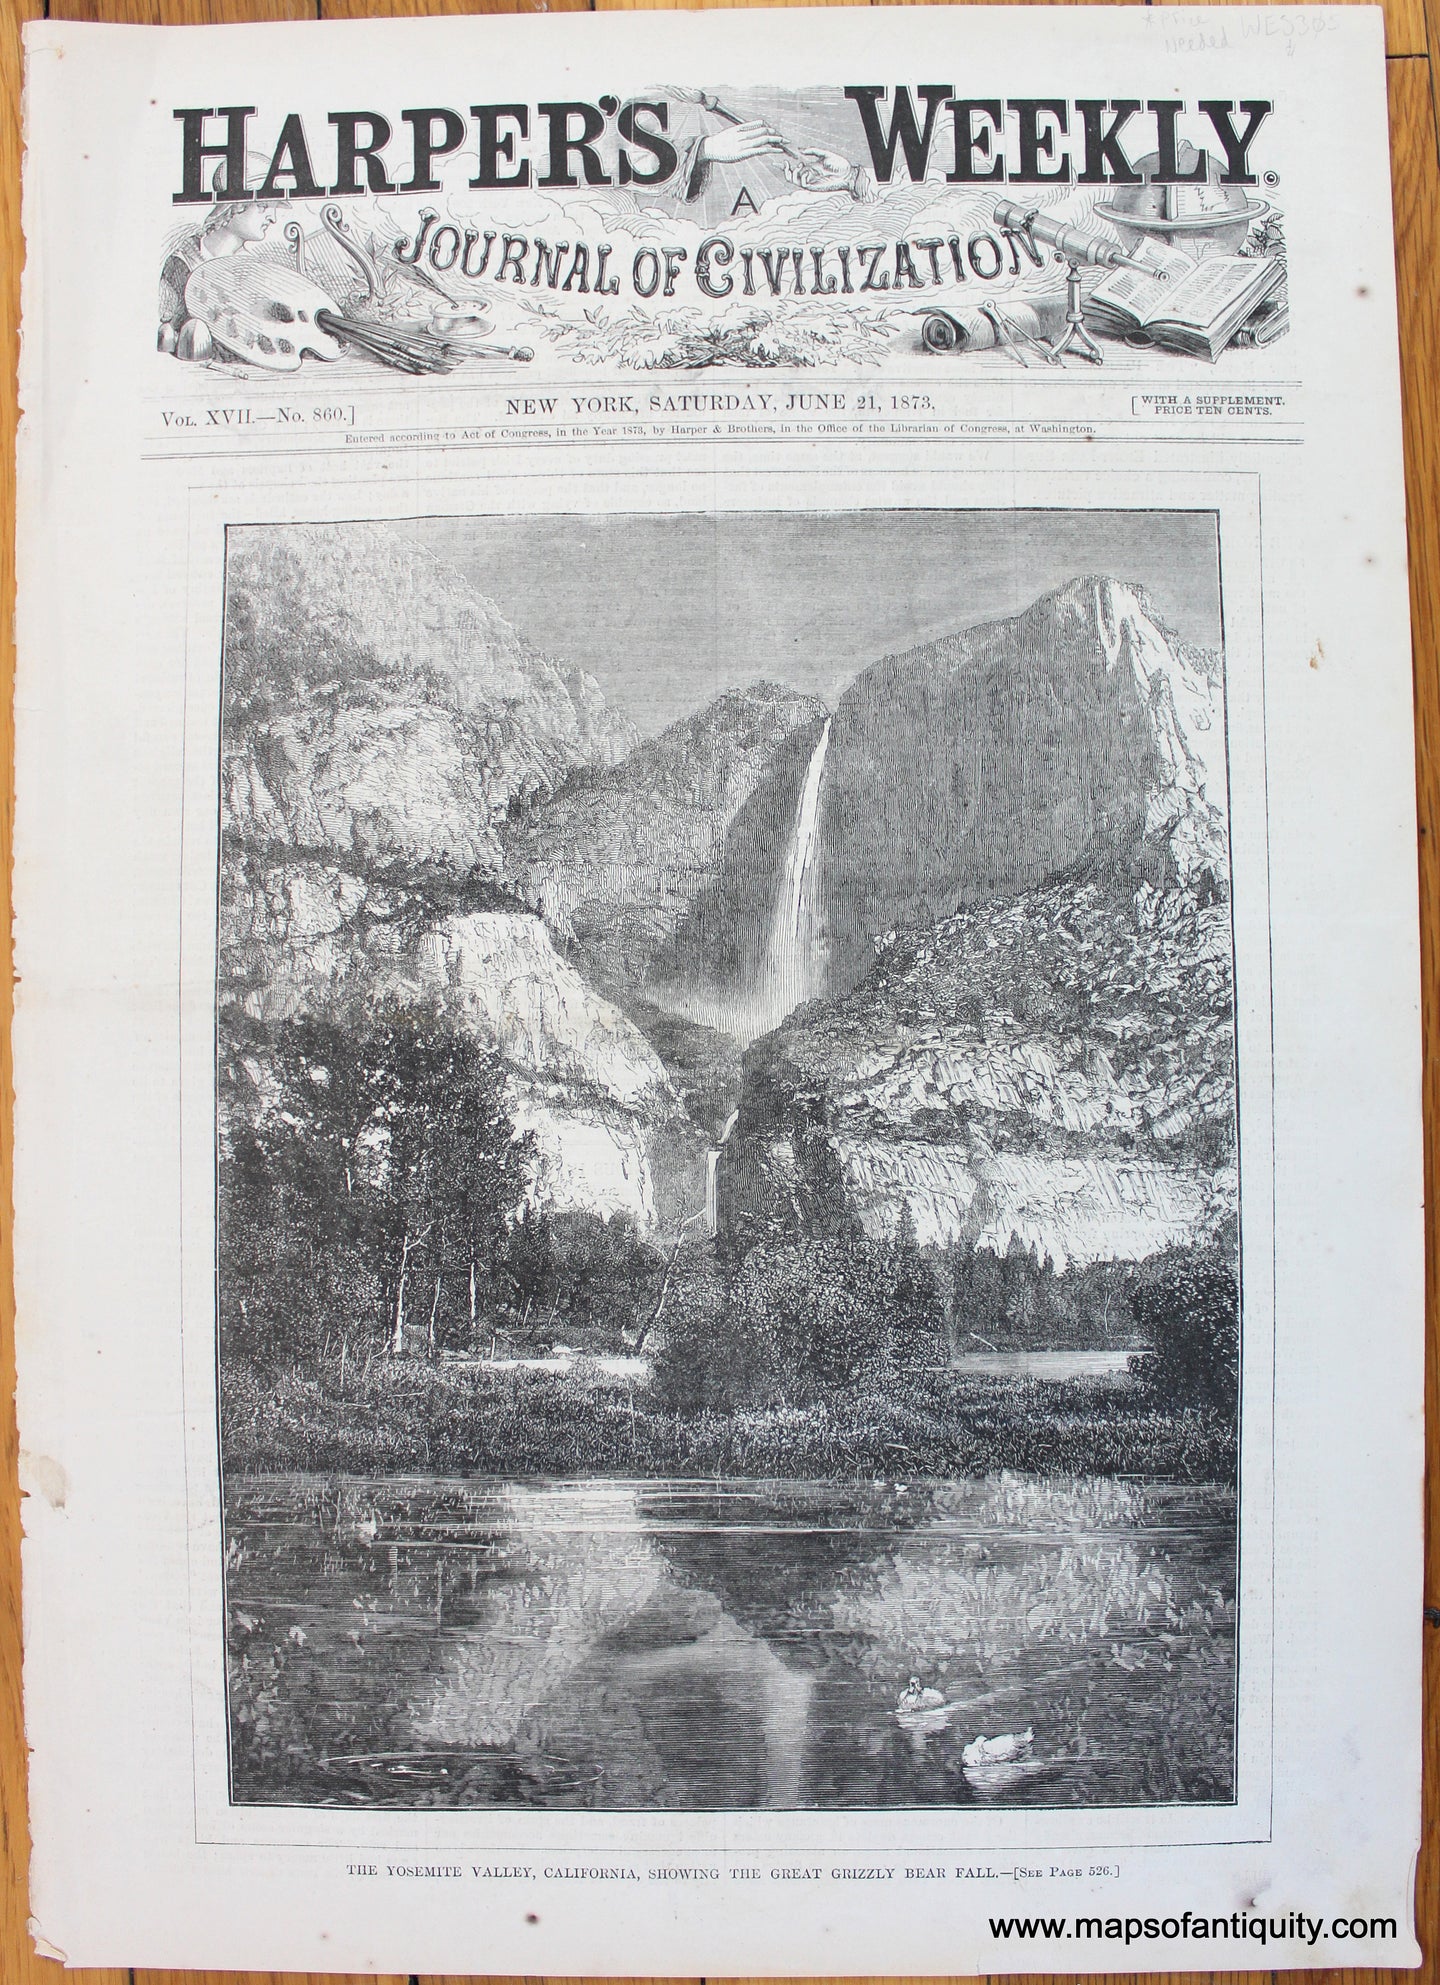 Antique-Print-Prints-Illustration-Yosemite-Valley-California-Great-Grizzley-Bear-Fall-National-Park-Harper's-Weekly-1873-1870s-1800s-Mid-Late-19th-Century-Maps-of-Antiquity